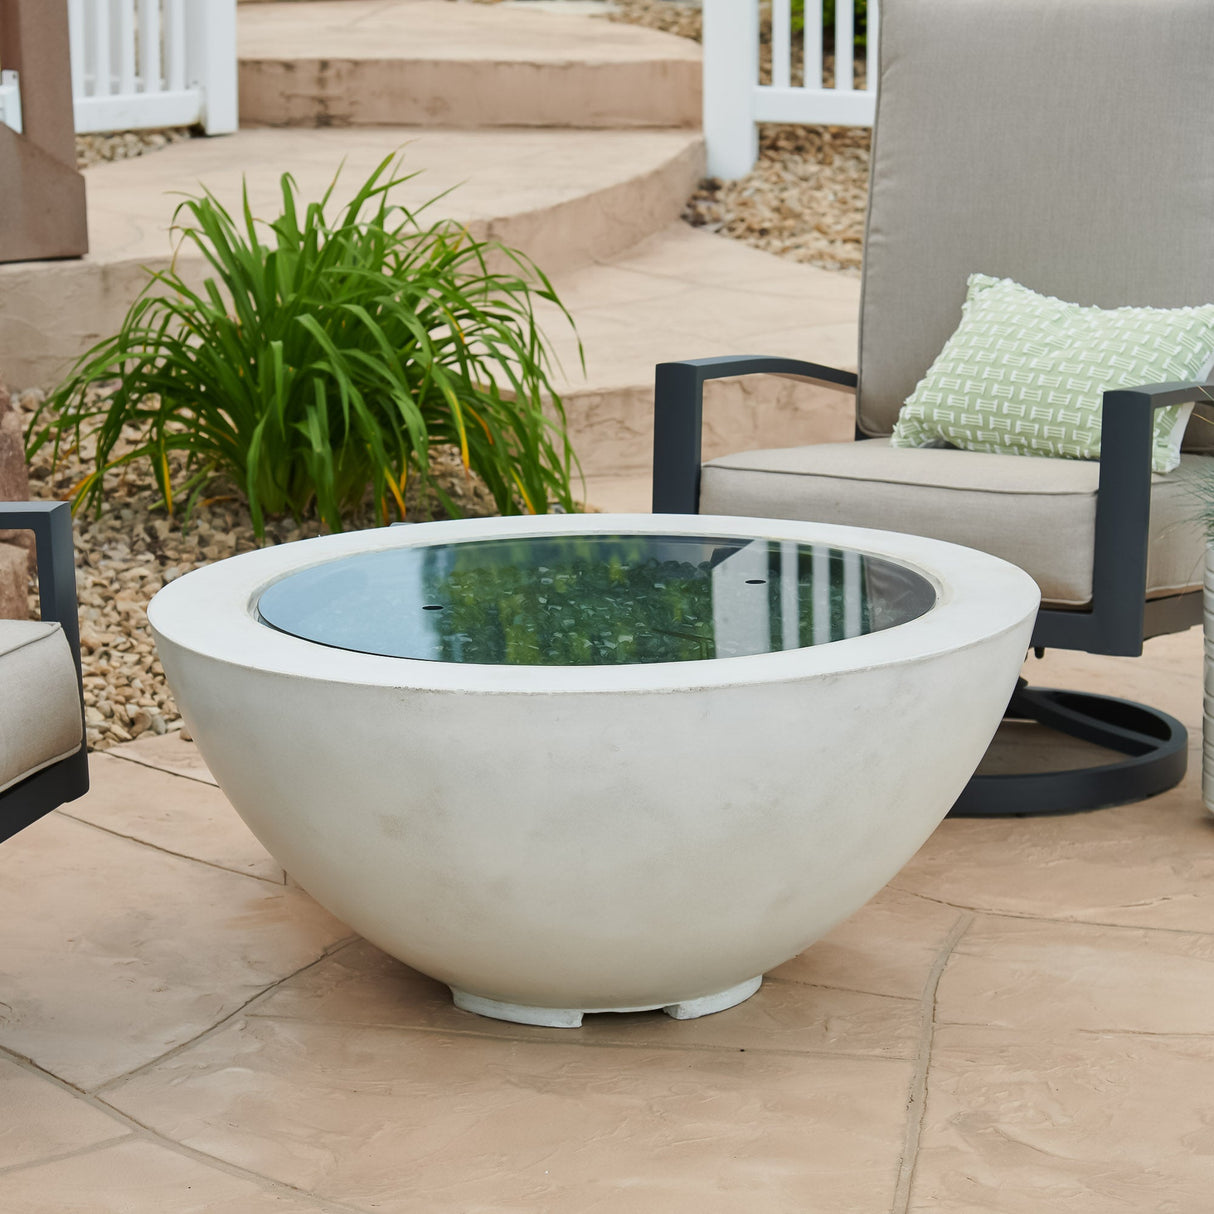 A cover placed on the burner of a White Cove Round Gas Fire Pit Bowl 42" while it is placed outside